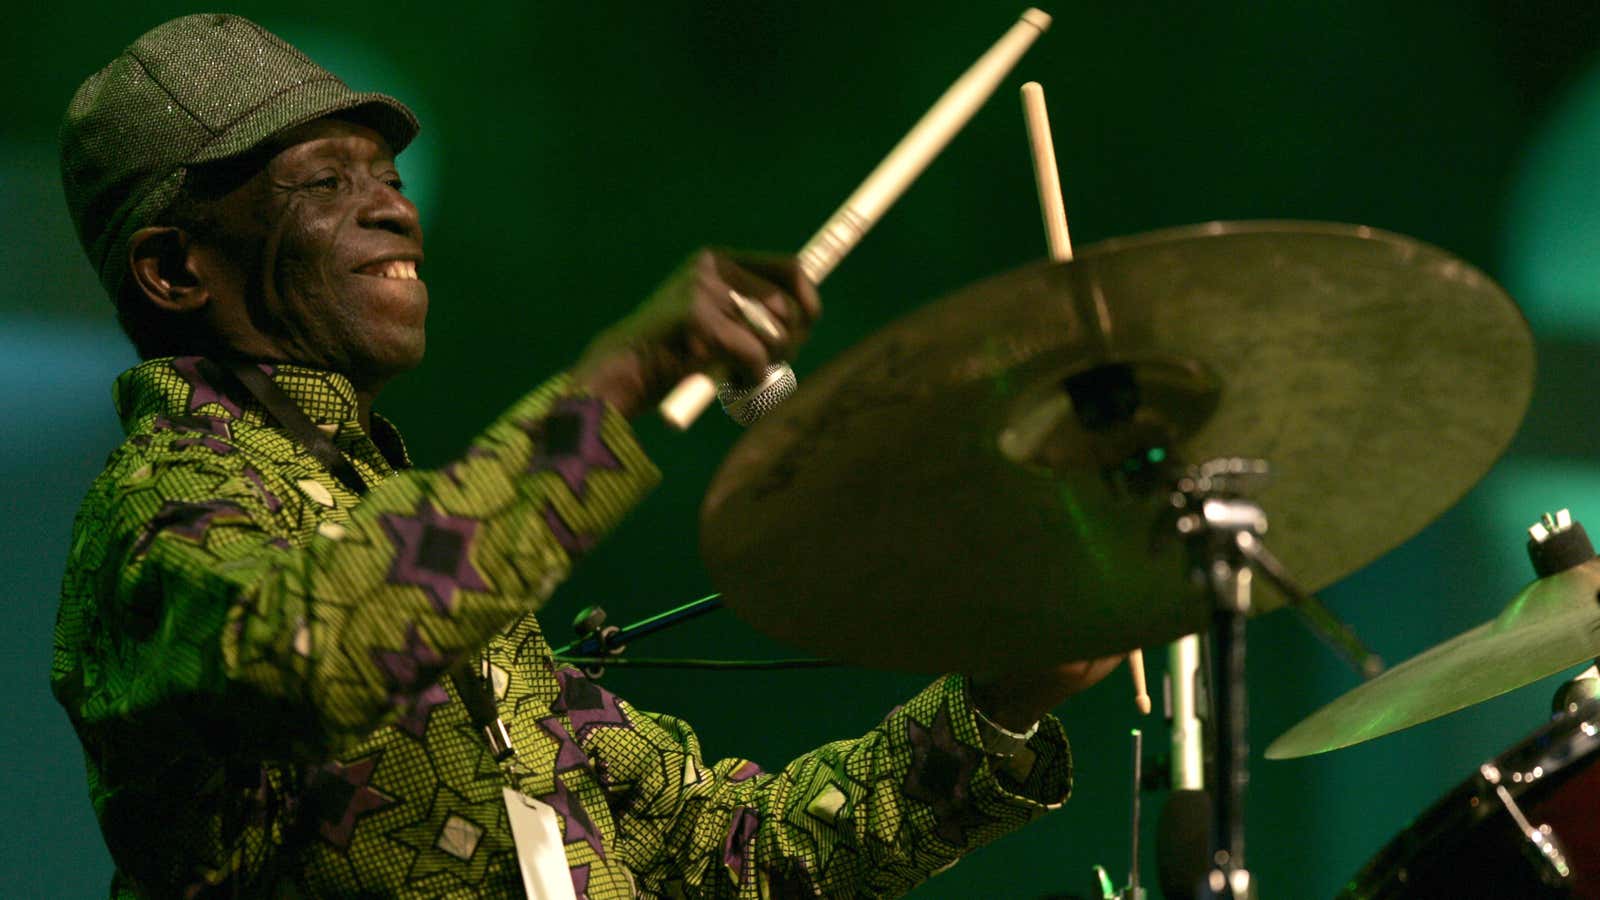 Nigerian drummer Tony Allen performs at the Mawazine Festival in Rabat, Morocoo May 17, 2008.